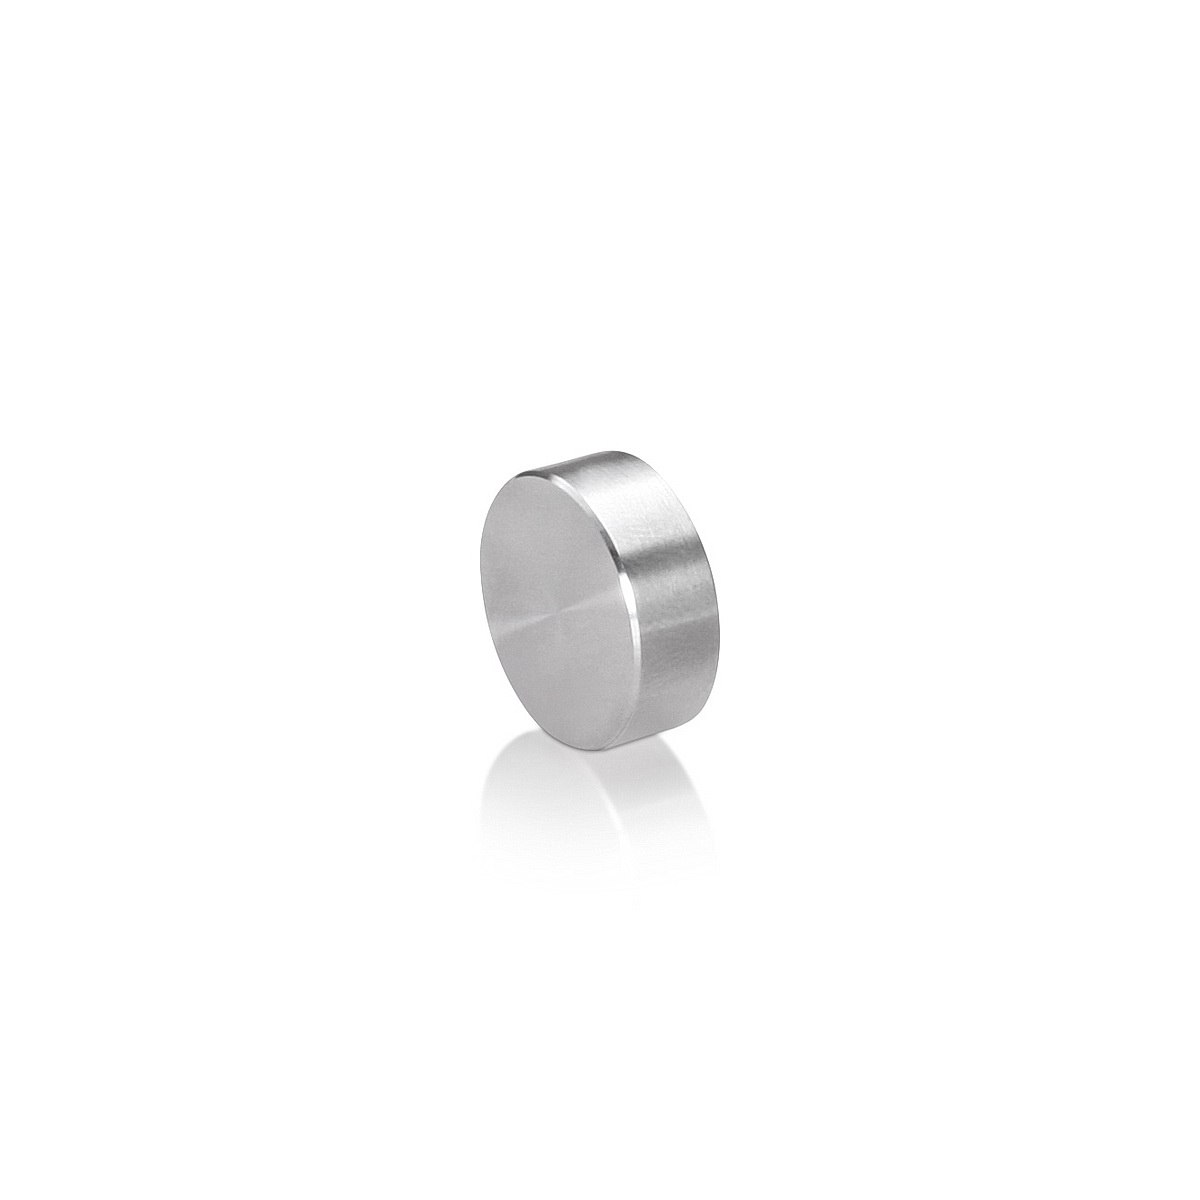 1/4-20 Threaded Caps Diameter: 3/4'', Height: 1/4'', Brushed Satin Stainless Steel Grade 304 [Required Material Hole Size: 5/16'']